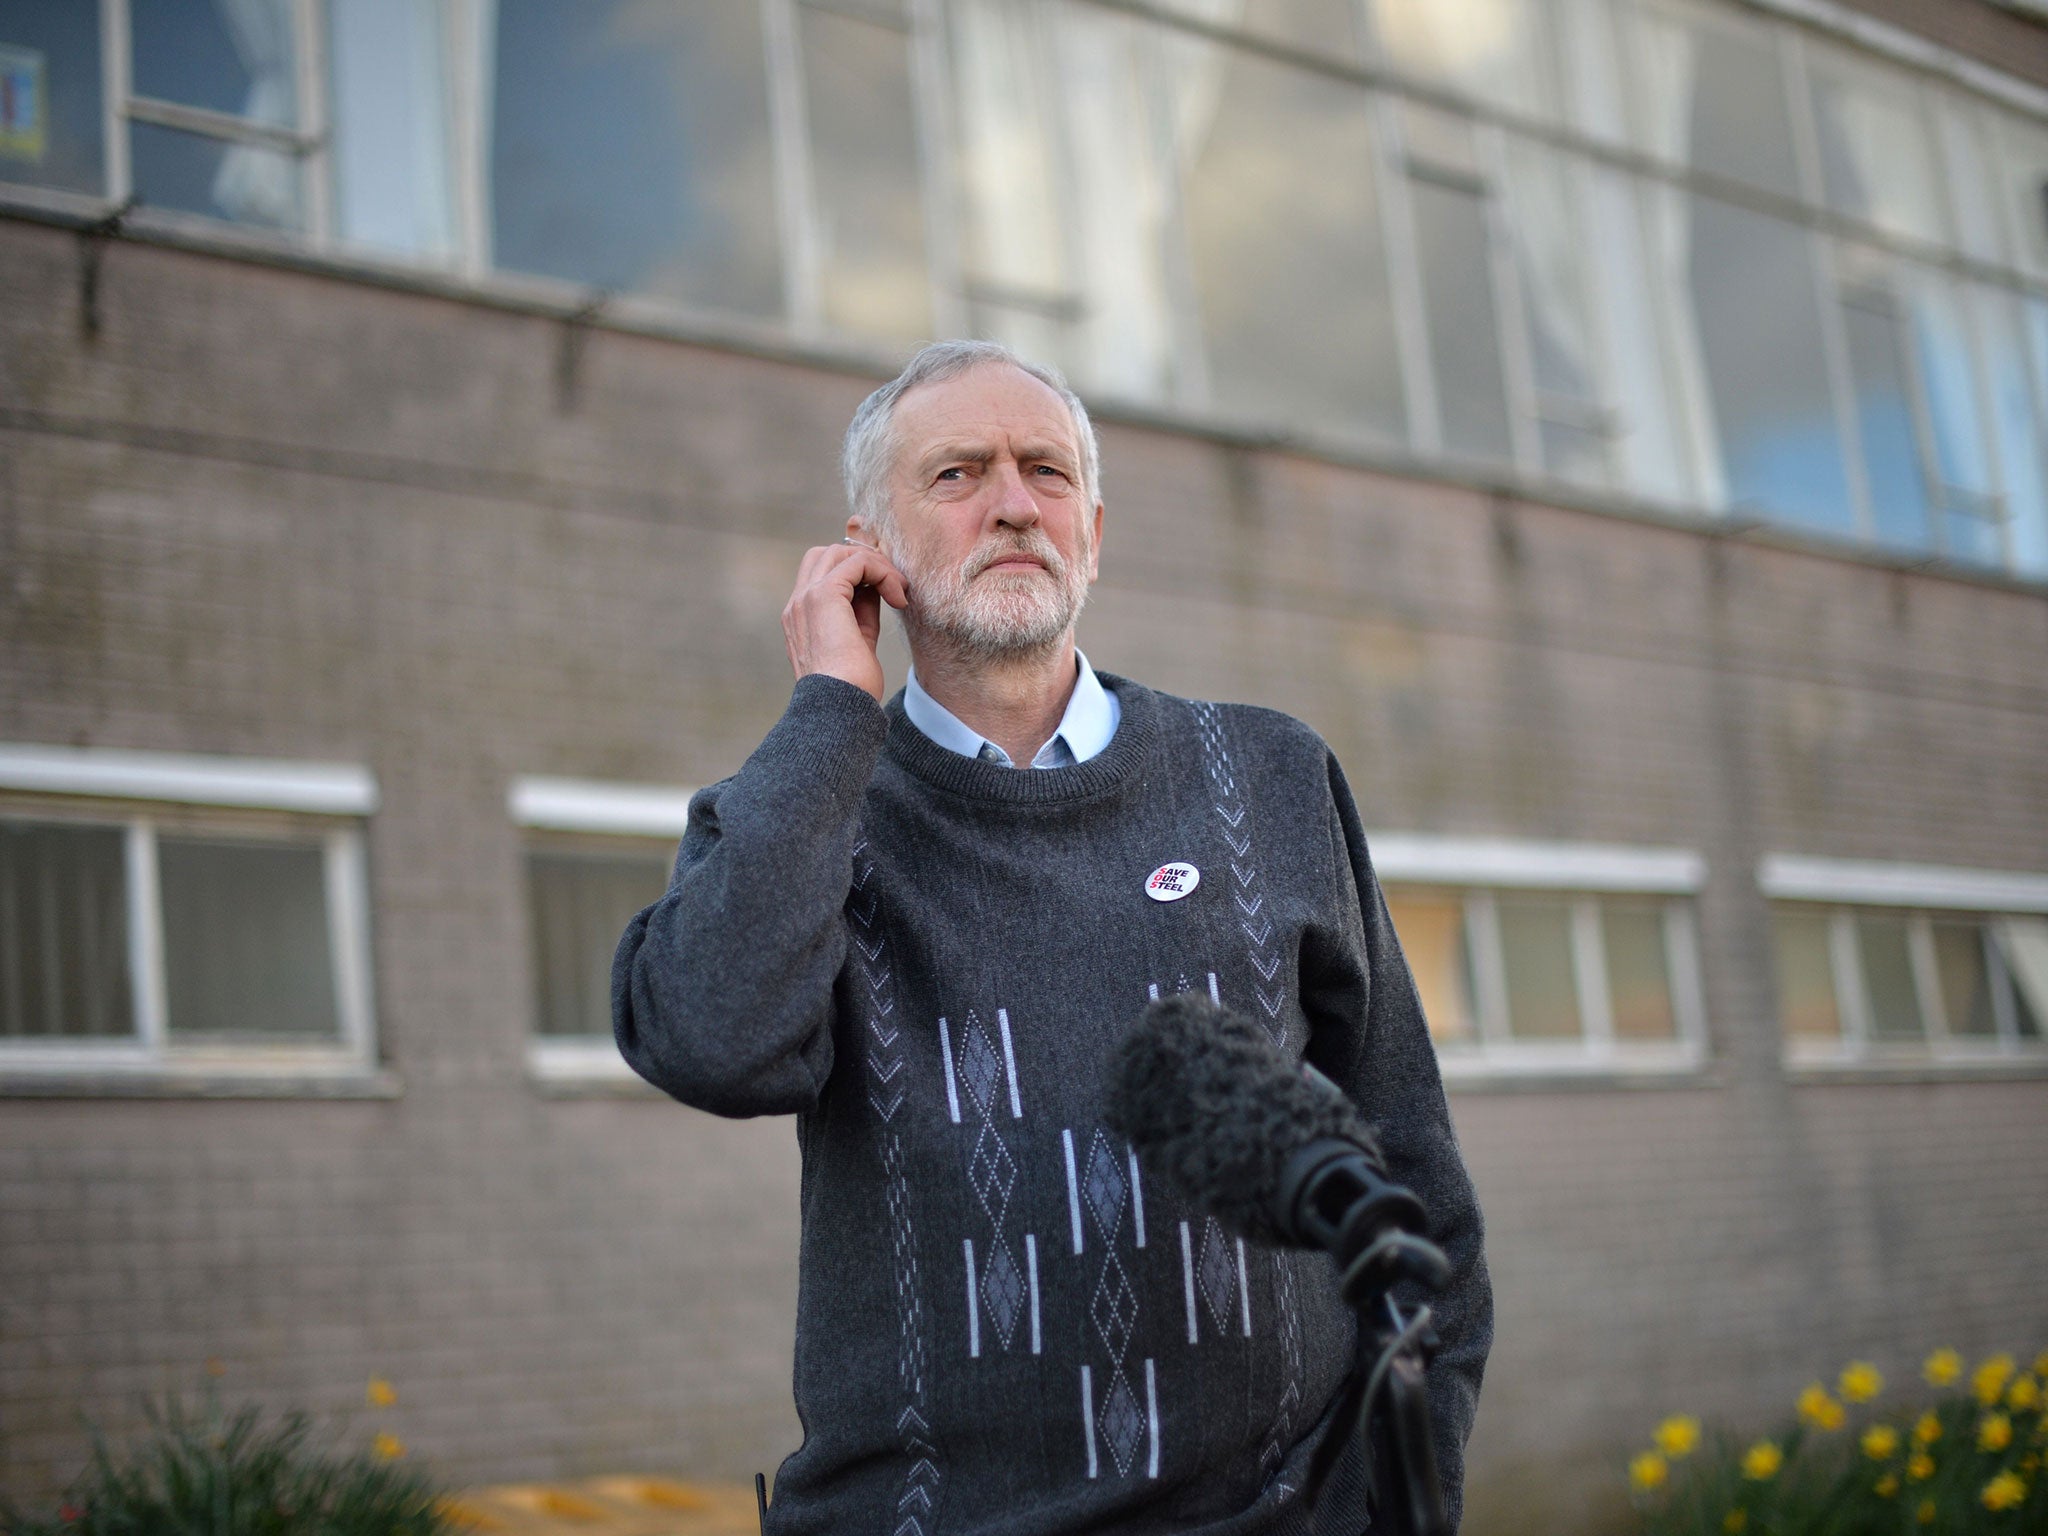 Jeremy Corbyn, it transpires, filed his tax return three months late and was fined for the delay